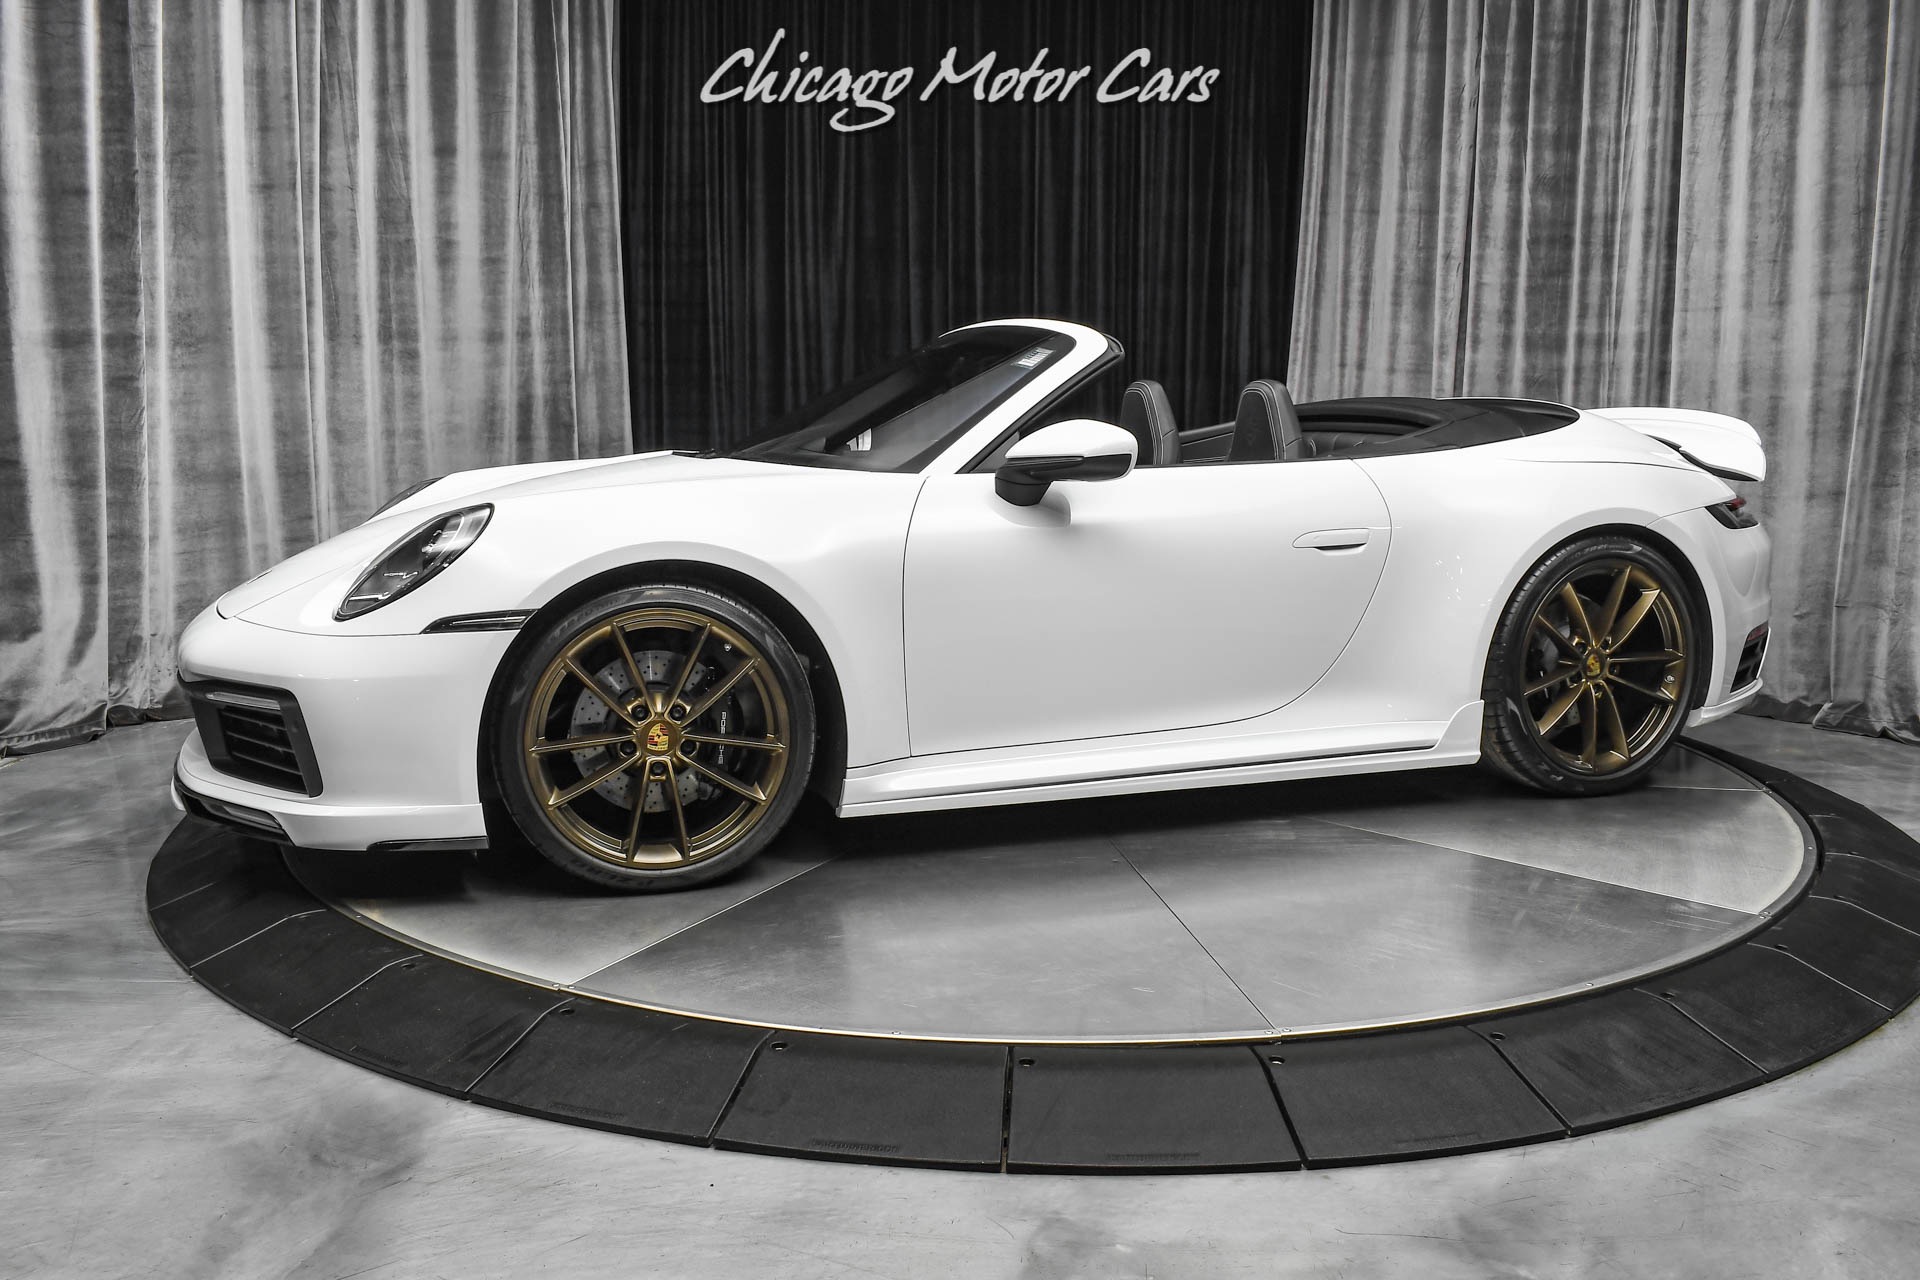 Used 2020 Porsche 911 Carrera S Sport Exhaust Bose PDLS+ Premium Pkg Sport  Pkg Loaded! For Sale (Special Pricing) | Chicago Motor Cars Stock #19050A